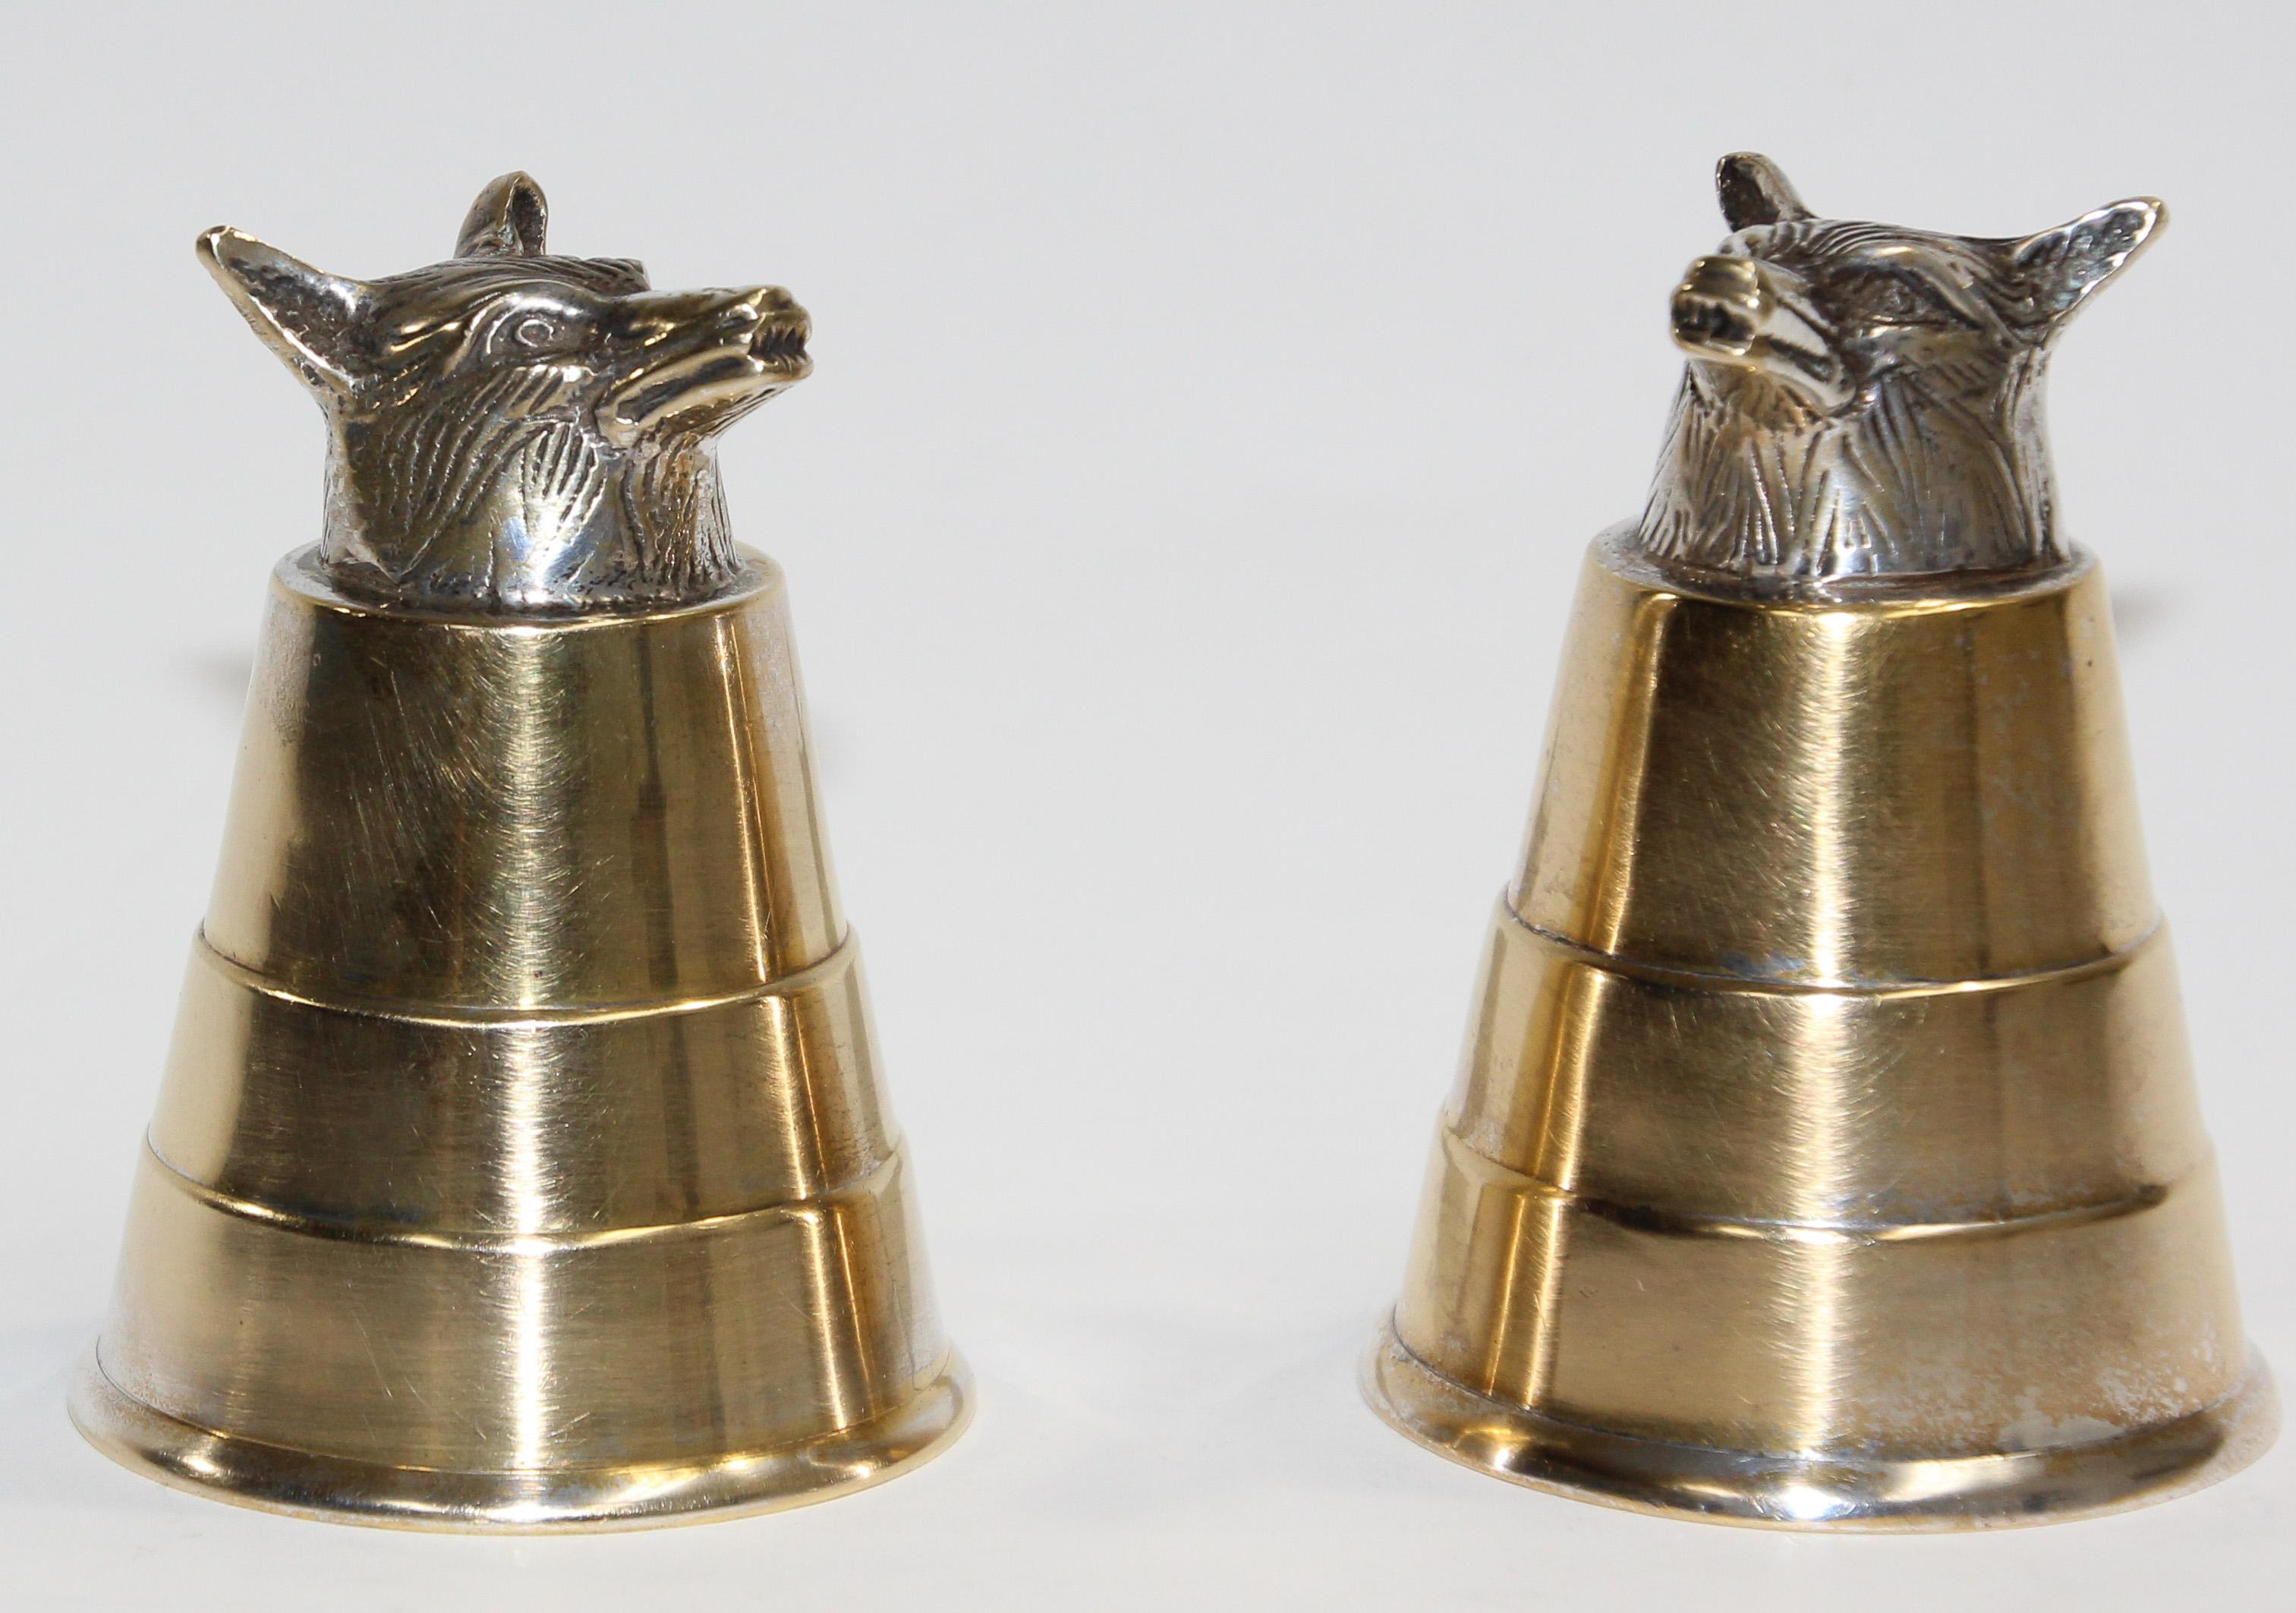 Classic Elizabeth II style stirrup cups, is of plain beaker form with a cast foxes head to one end.
Set of two playful stirrup cups from the 1970s.
Gorgeous stirrup cup adorned with a hand-carved fox head on its base.
They balance with the animal